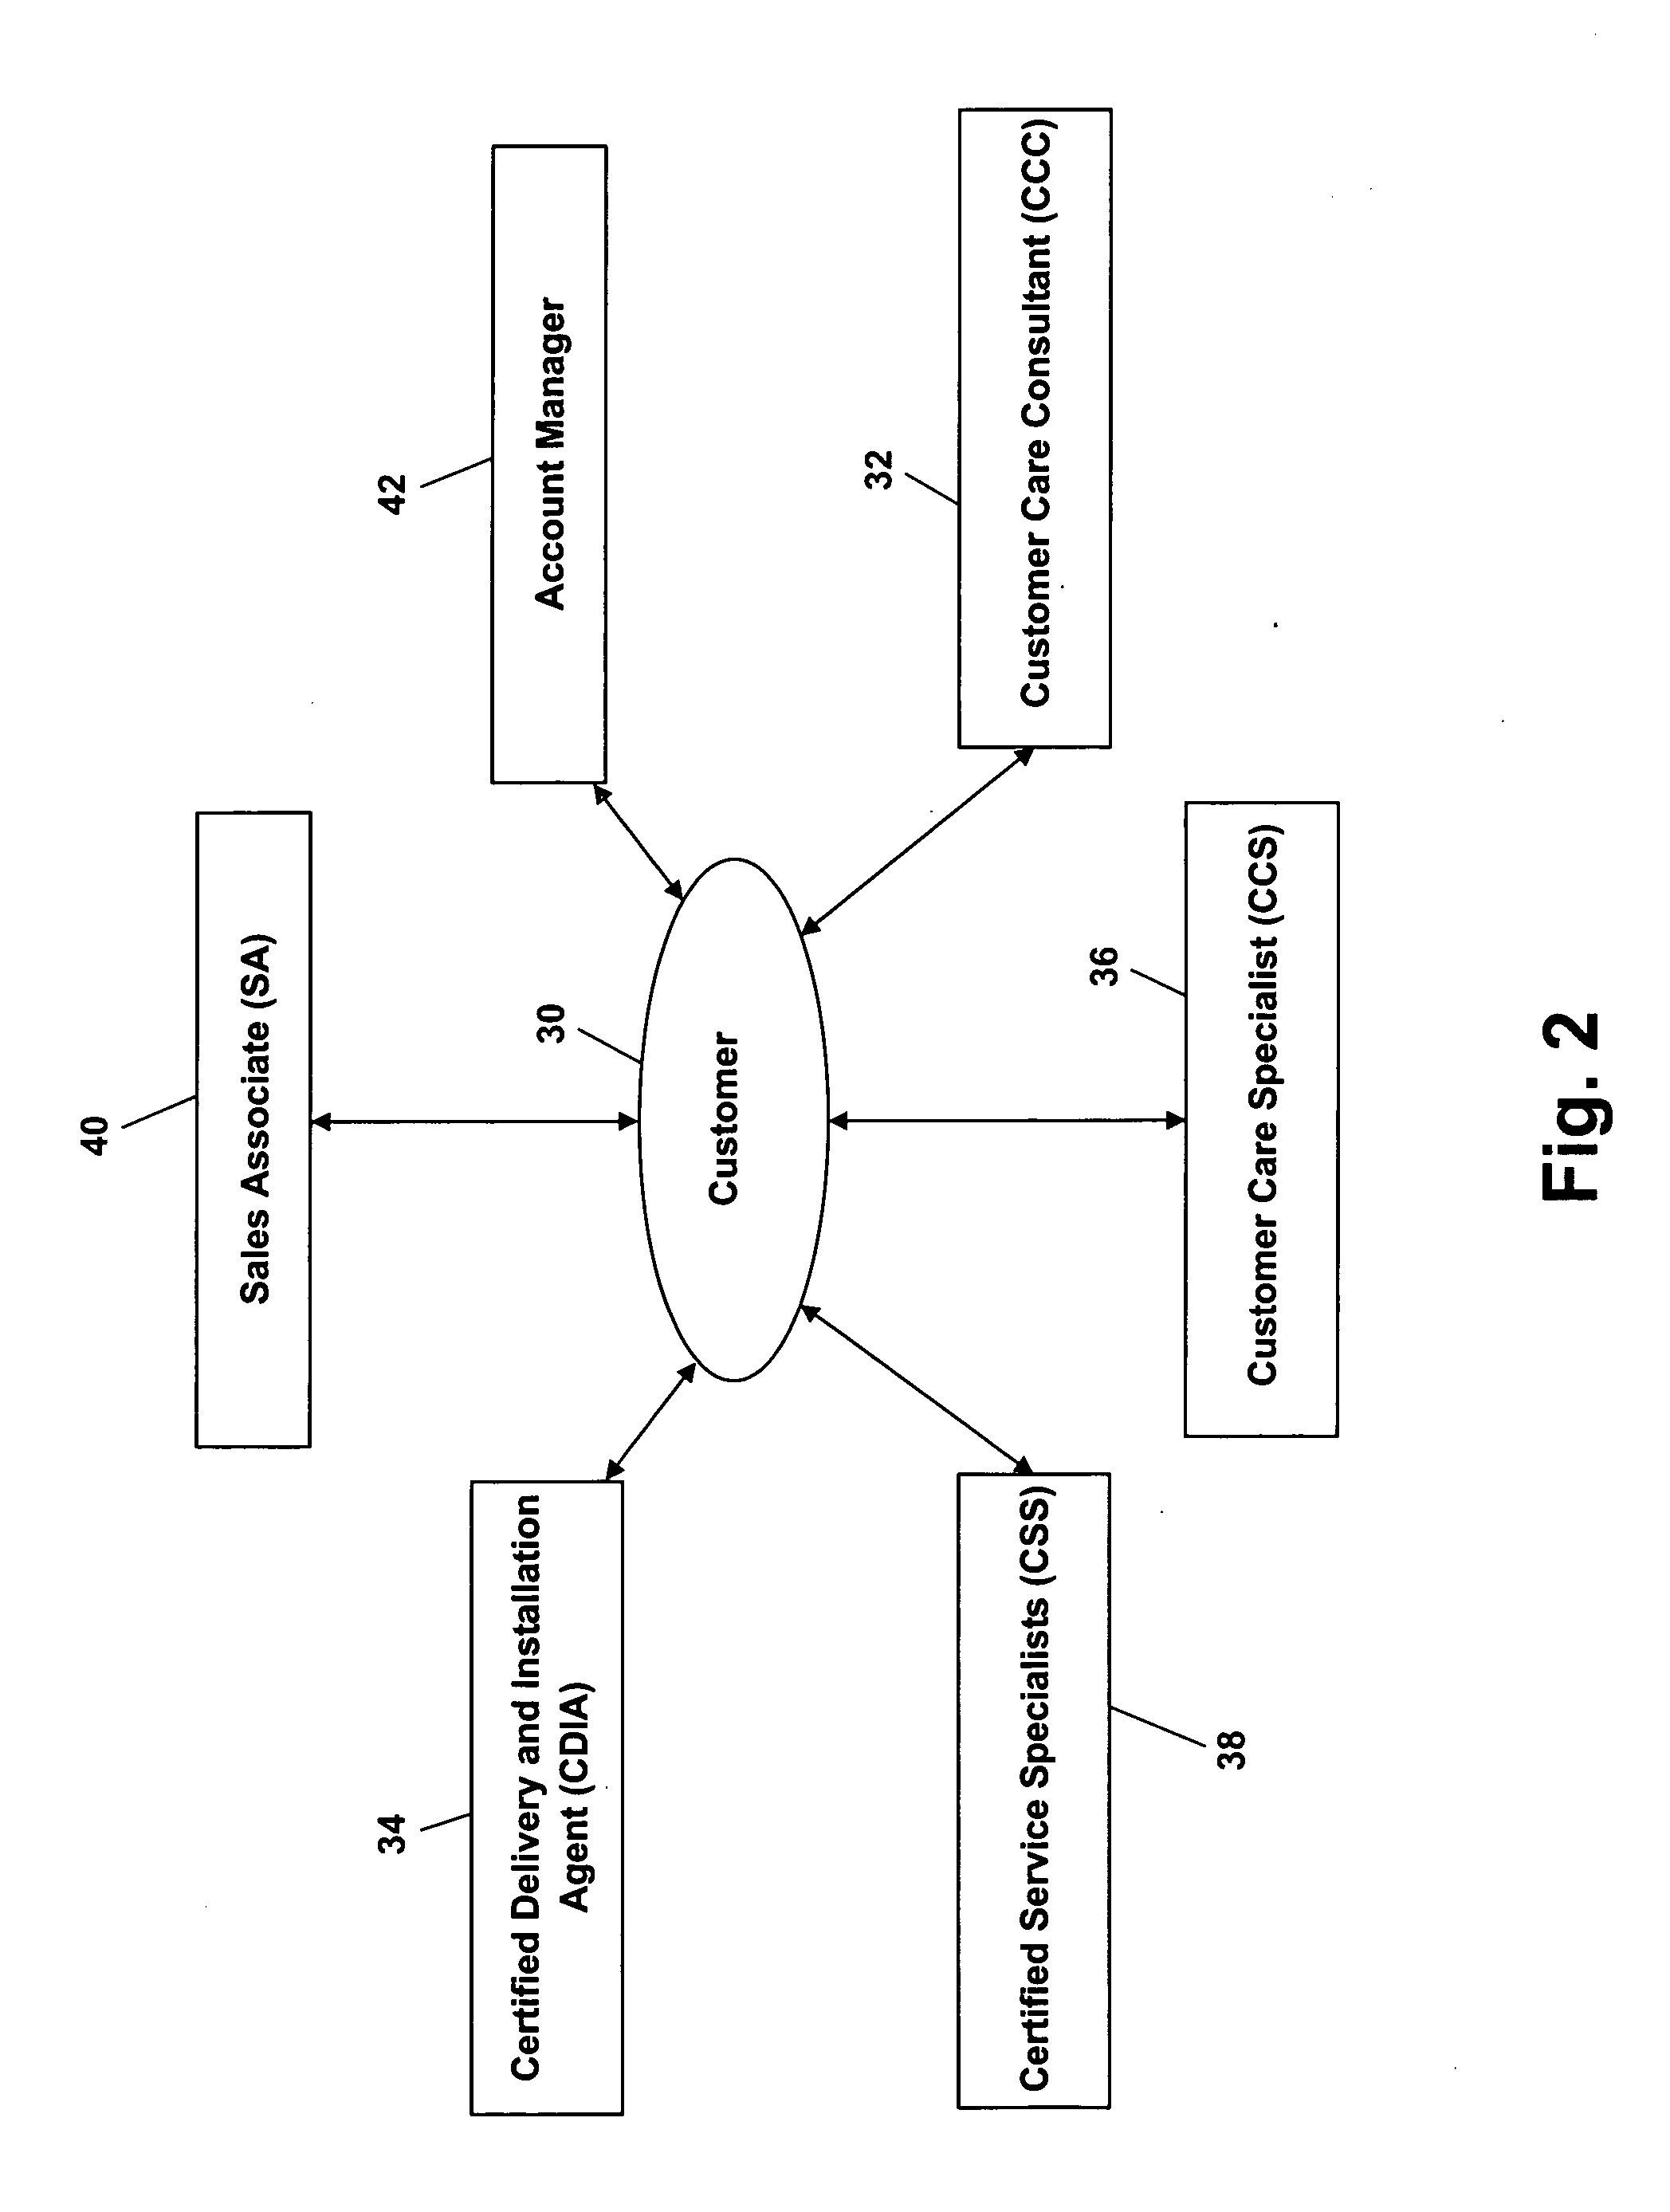 Method and system for providing customer service for a household appliance